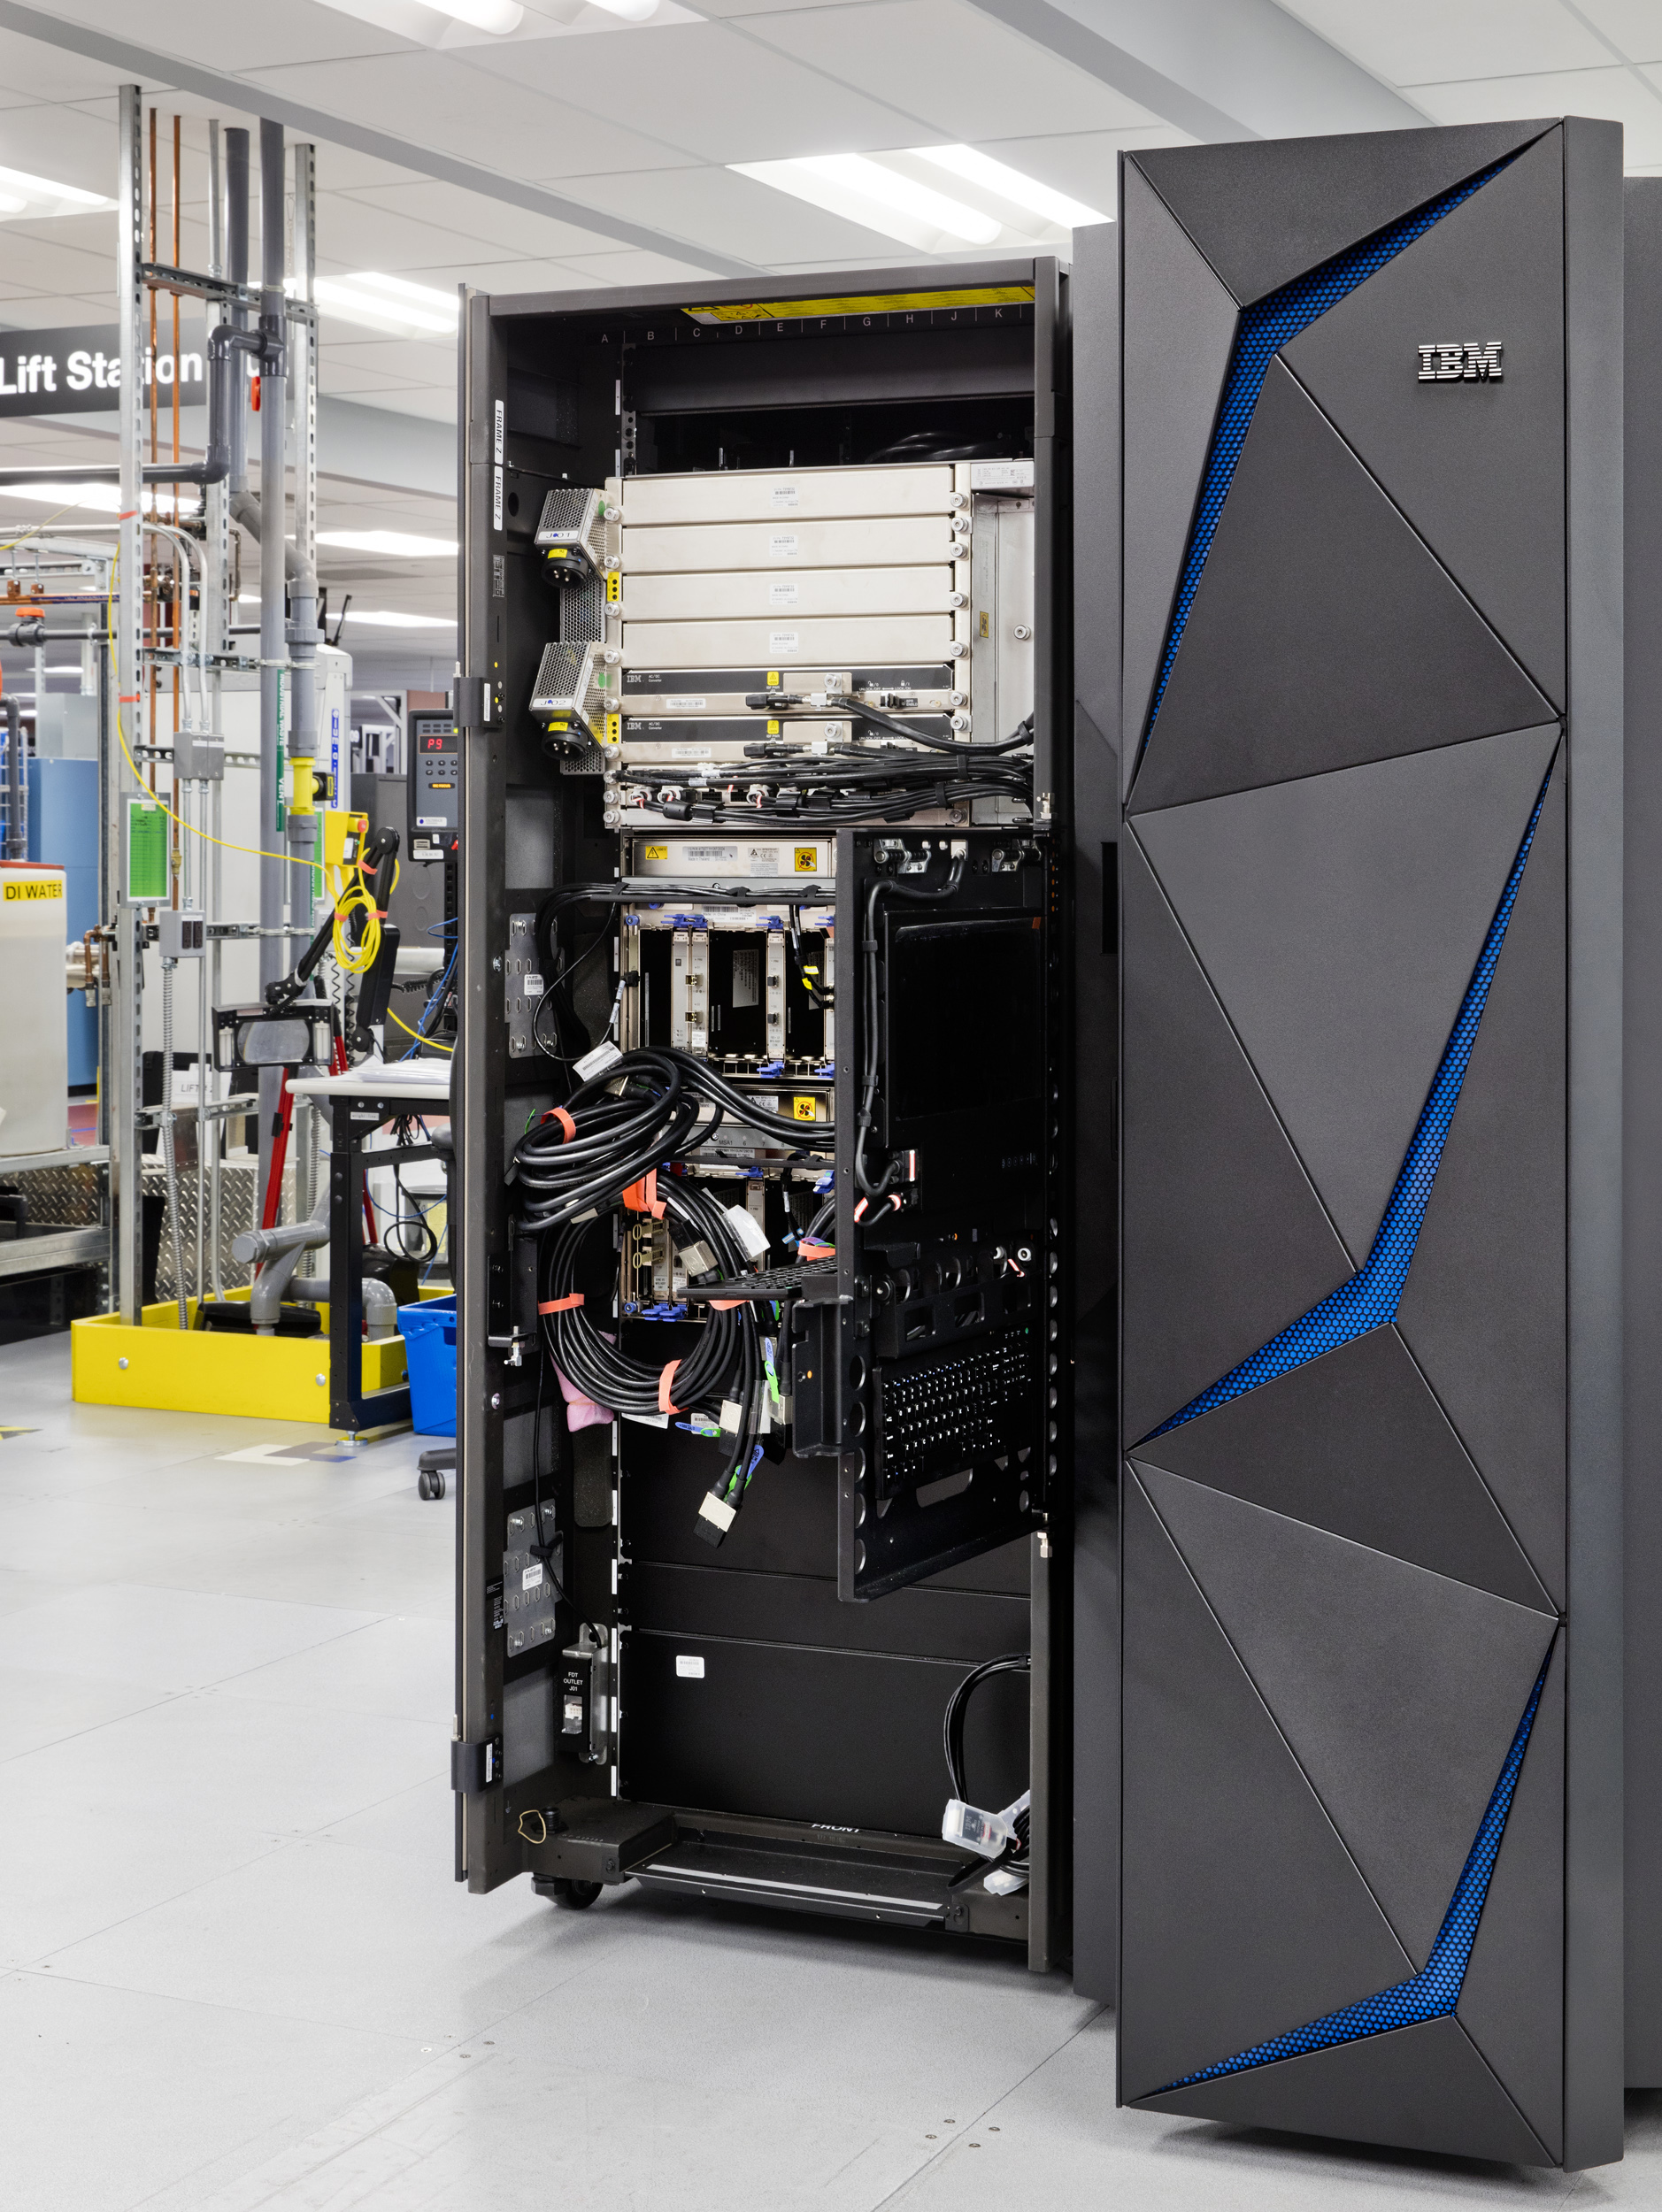 The IBM Z mainframe is a breakthrough in data protection technology designed to tackle the epidemic of data breaches. Contact: Lori Bosio, IBM, bosiol@us.ibm.com 914-765-2367 (Photo Credit: Connie Zhou for IBM)